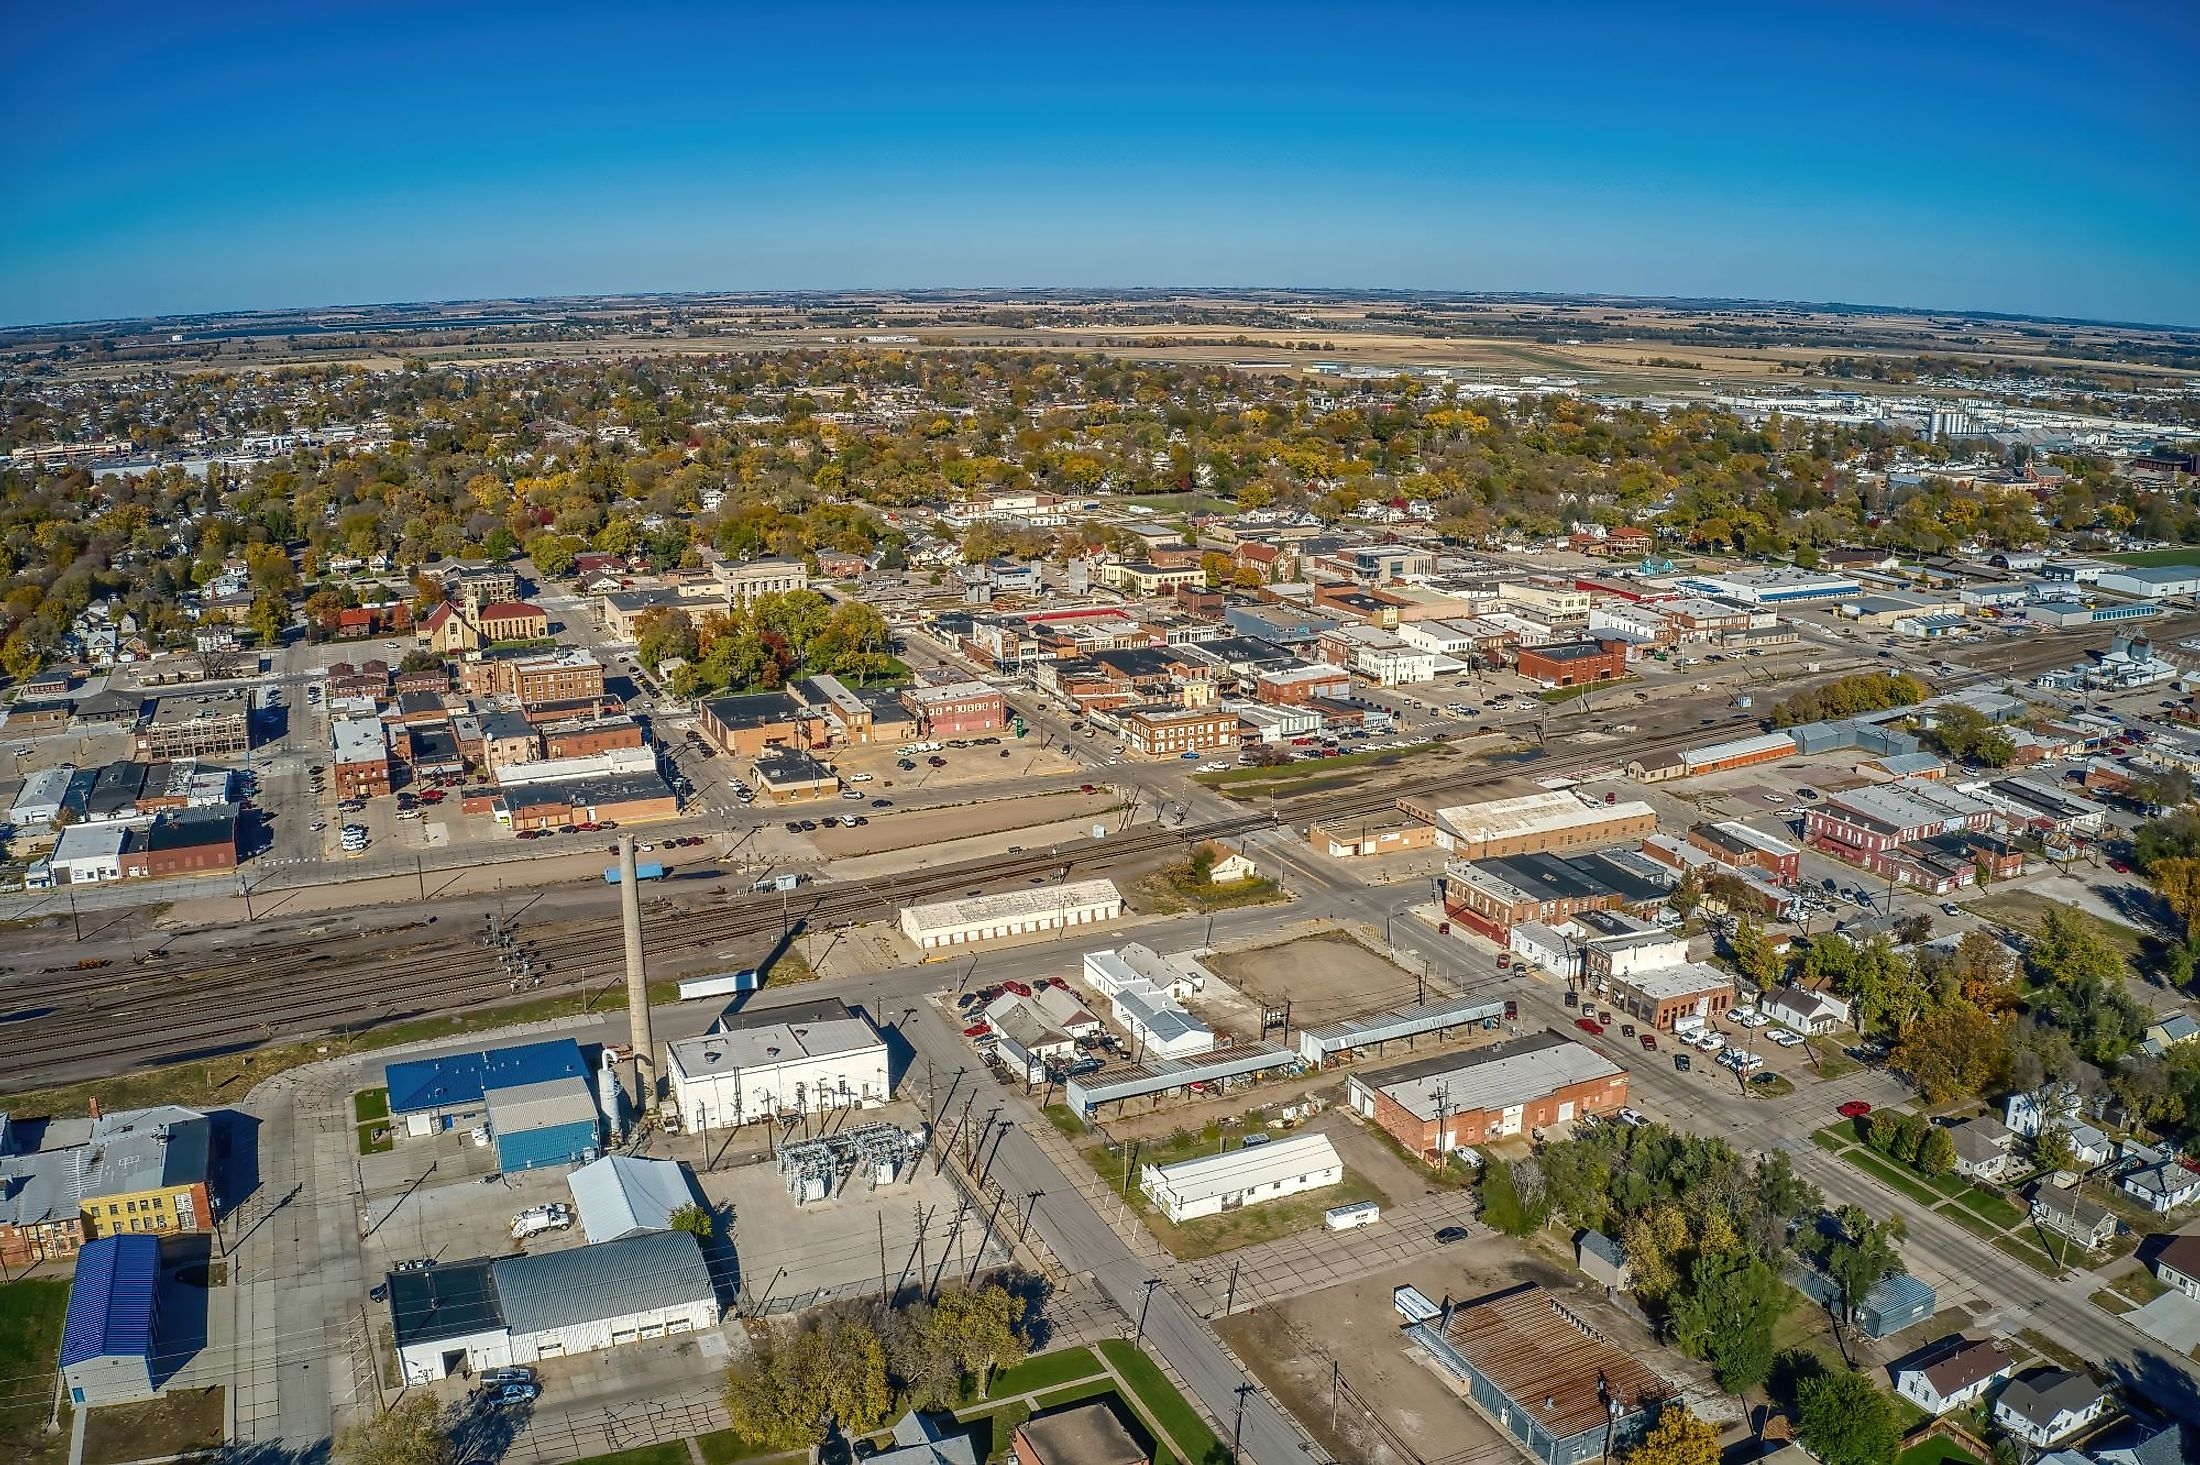 Aerial view of the small town of Columbus, Nebraska